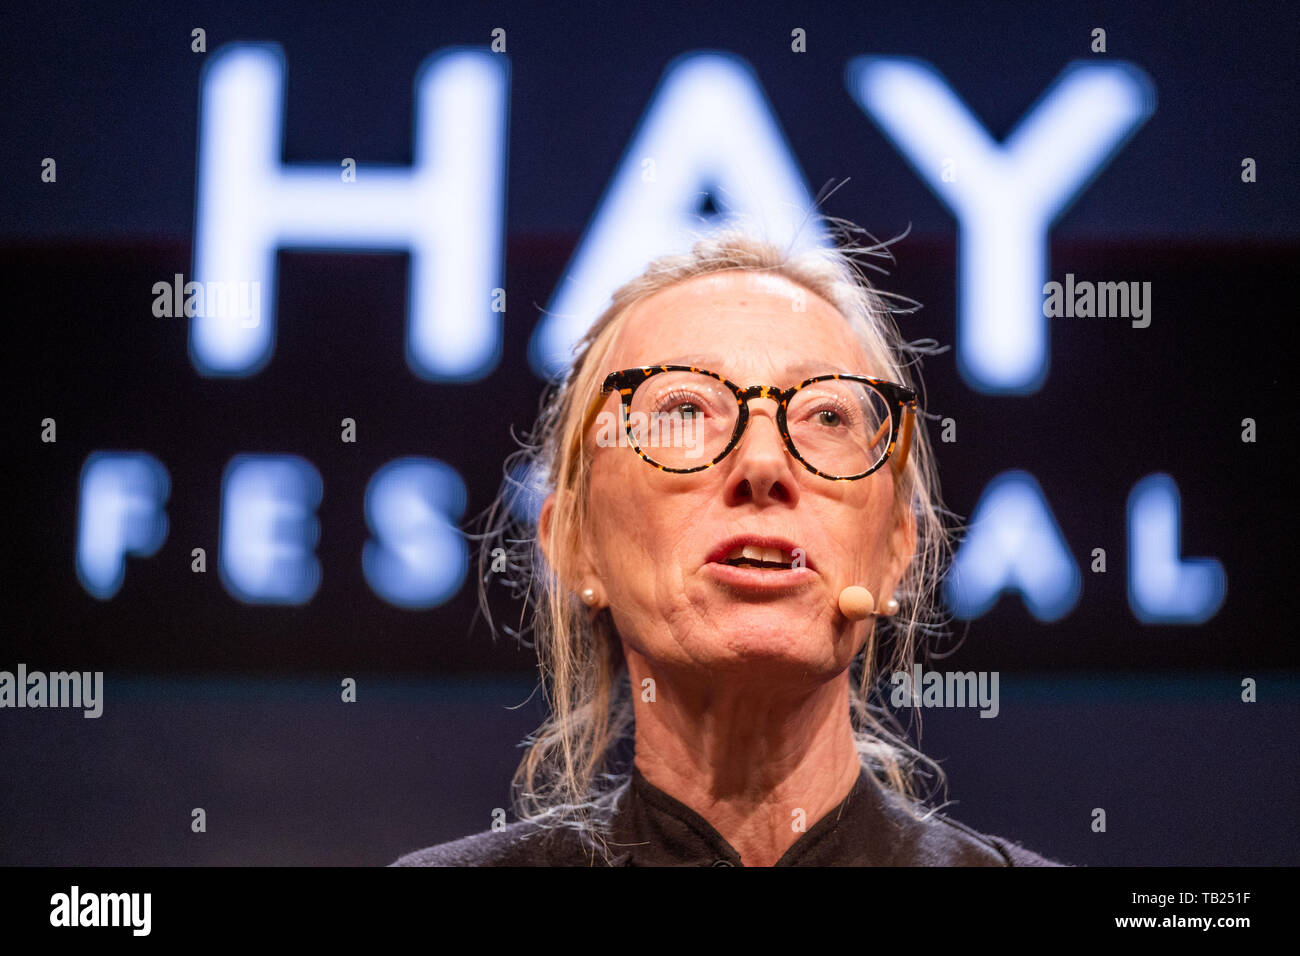 The Hay Festival, Hay on Wye, Wales UK, Wednesday 29th May 2019. Sophia Jansson, niece of Tove Jansson, the Swedish/Finnish writer-illustrator creator of the classic stories about the Moomins, speaking about a new TV adaptation of the works, at the Hay Festival 2019 Photo Credit: Keith Morris/Alamy Live News Stock Photo